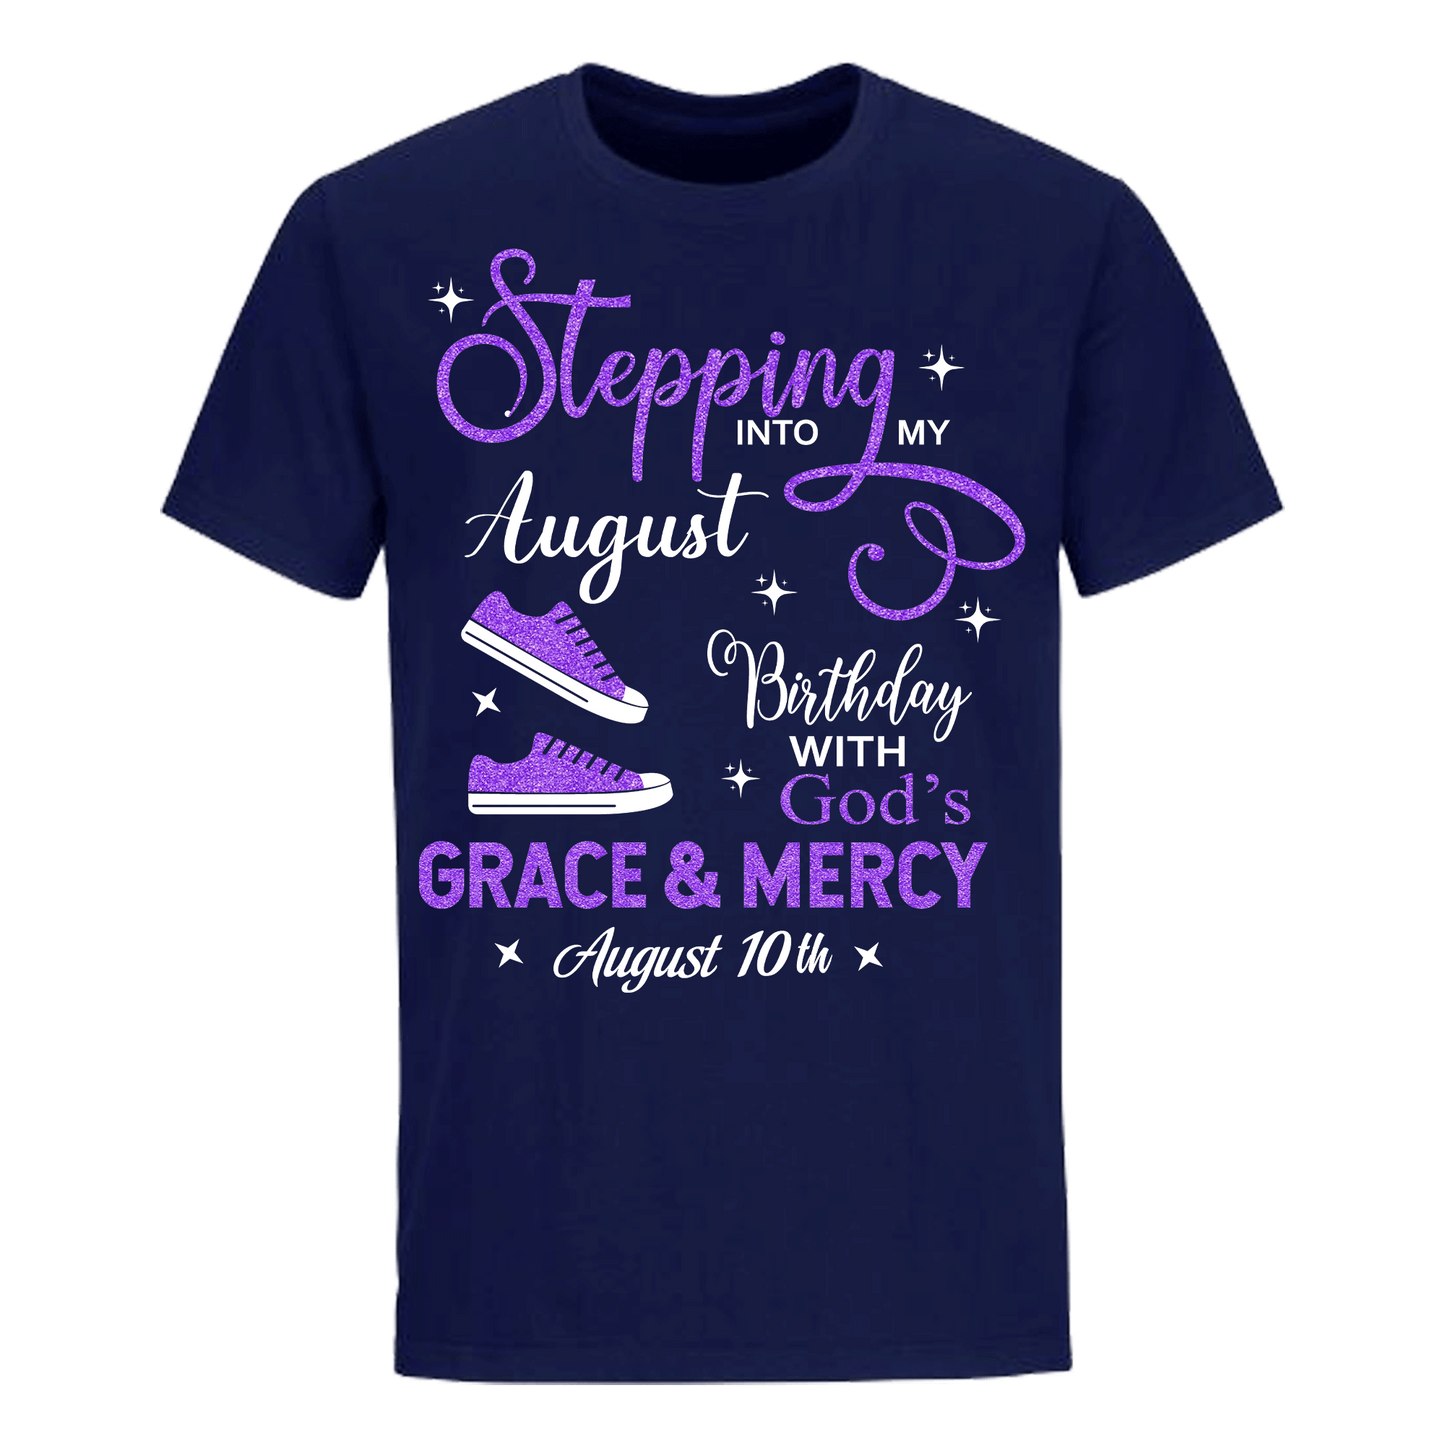 AUGUST 10 GRACE AND MERCY